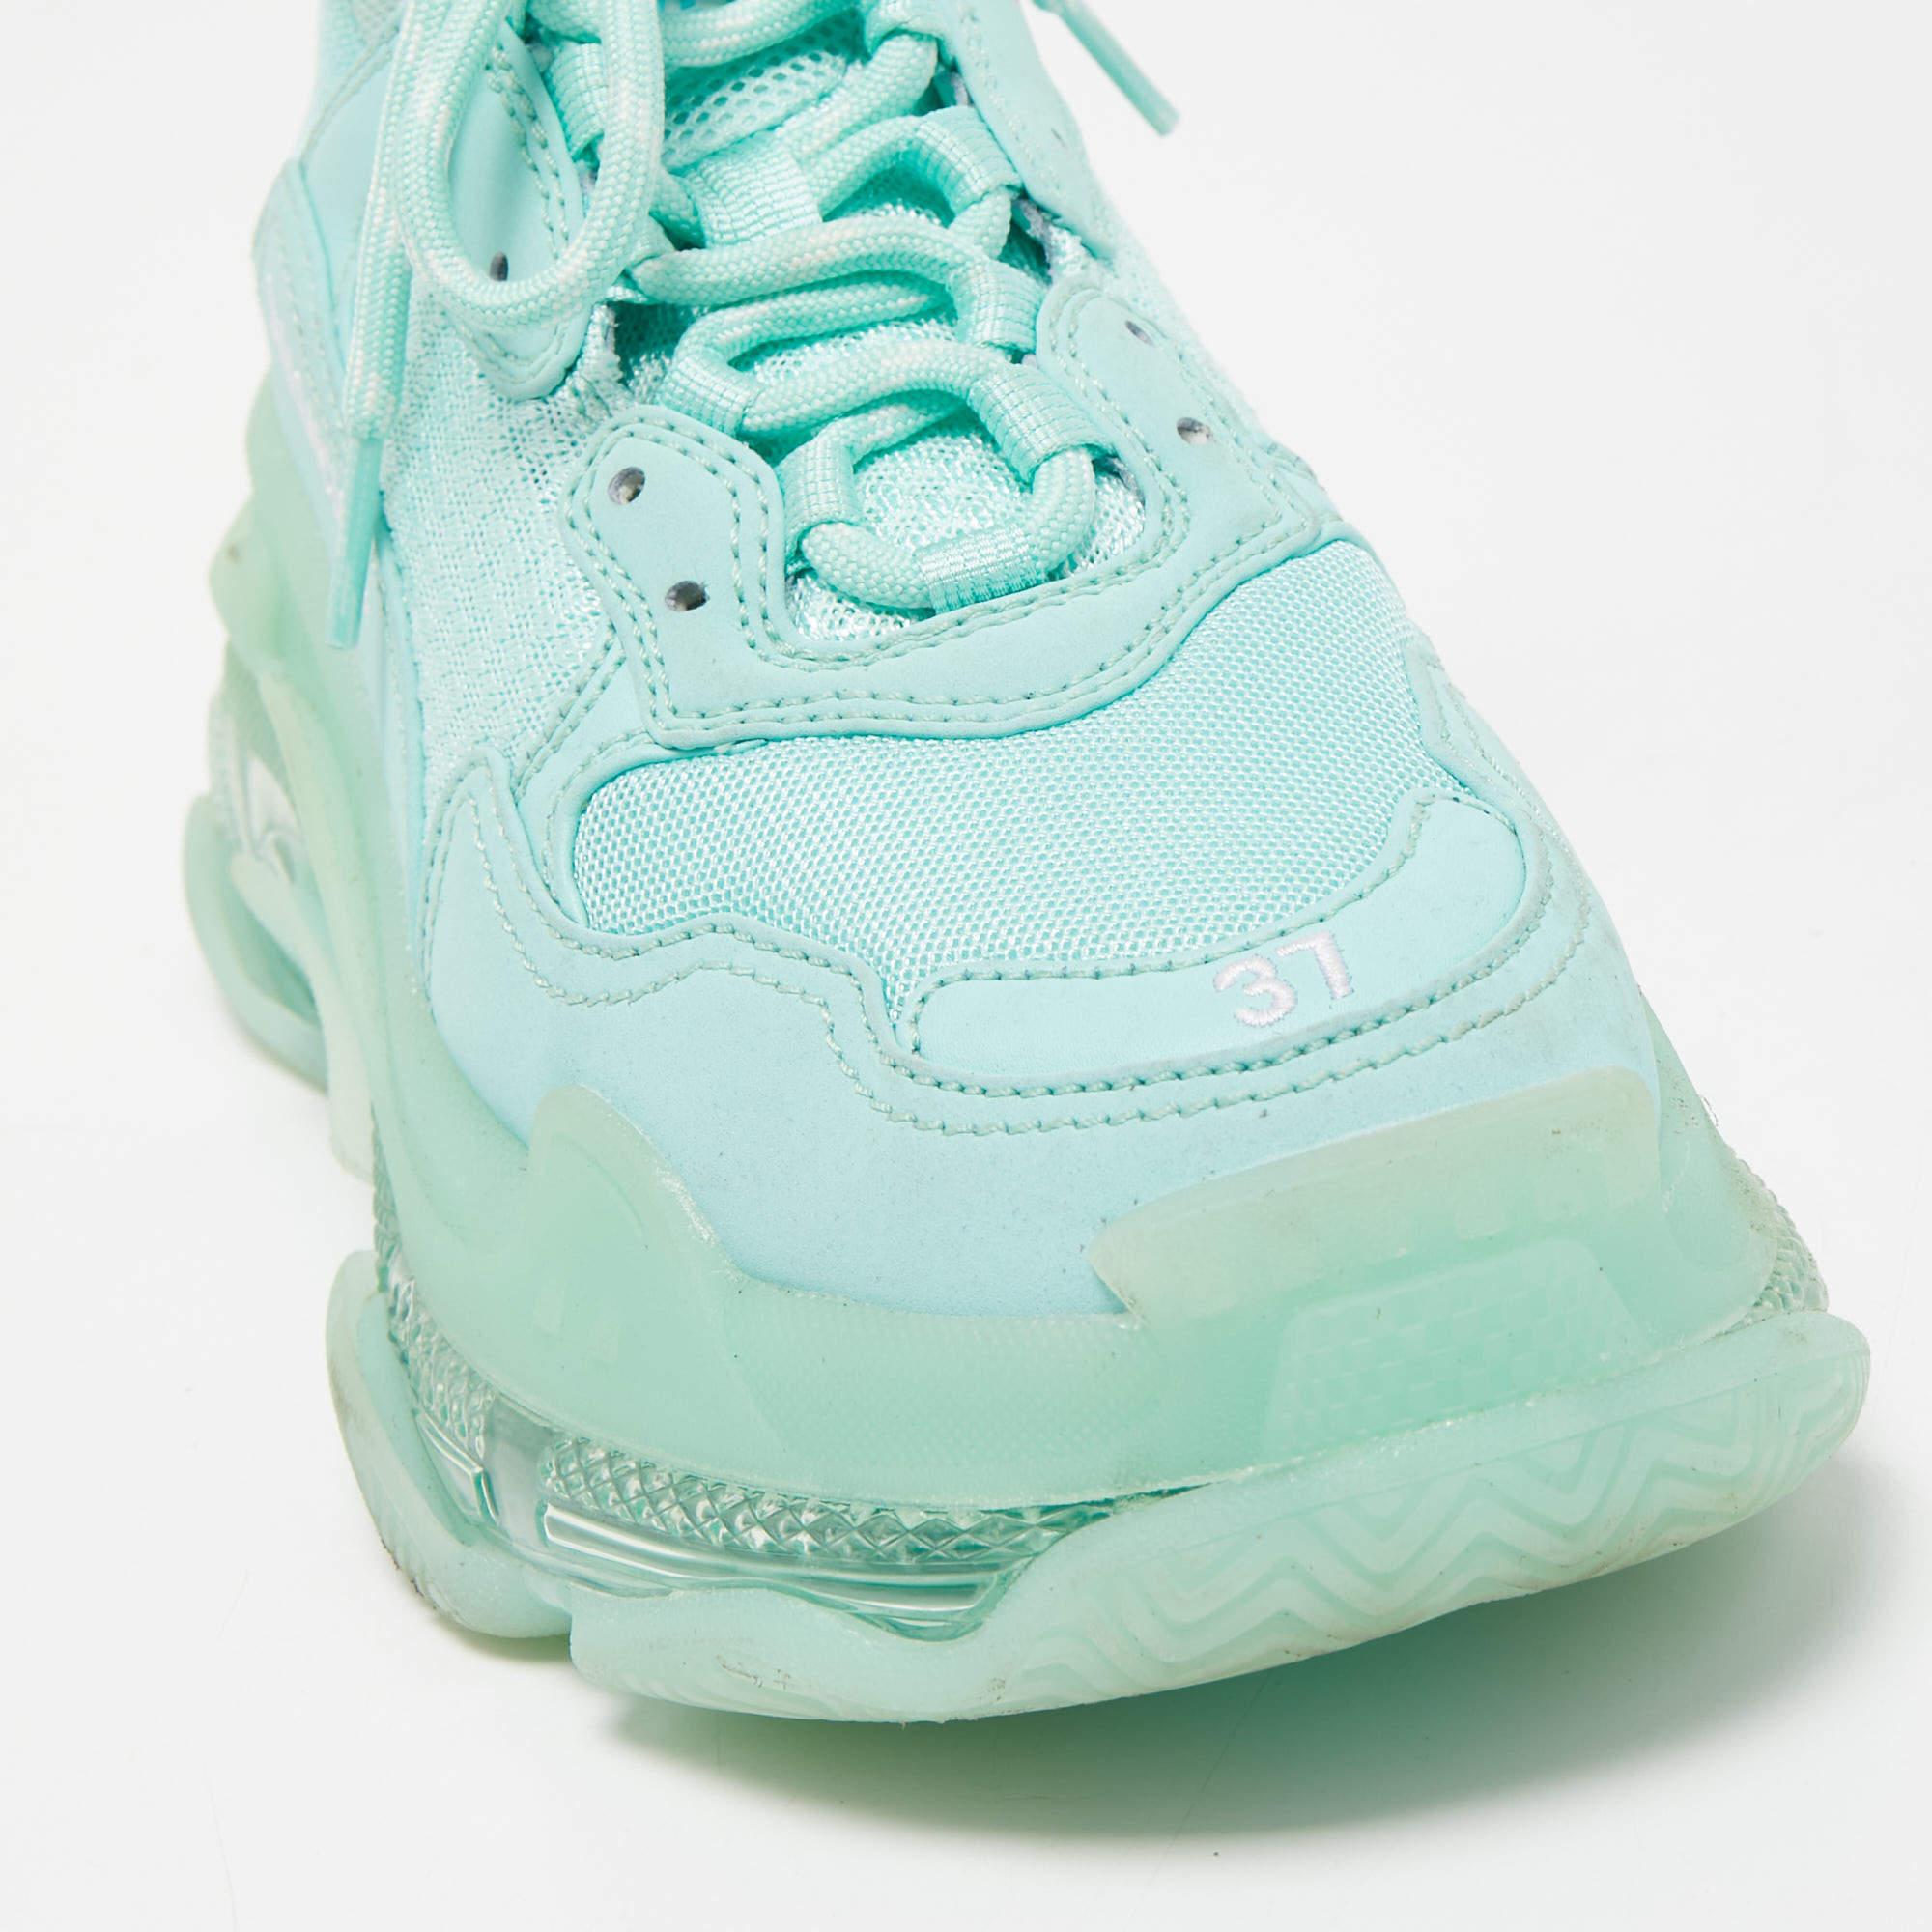 Balenciaga Turquoise Leather and Mesh Triple S Clear Sneakers Size 37 3